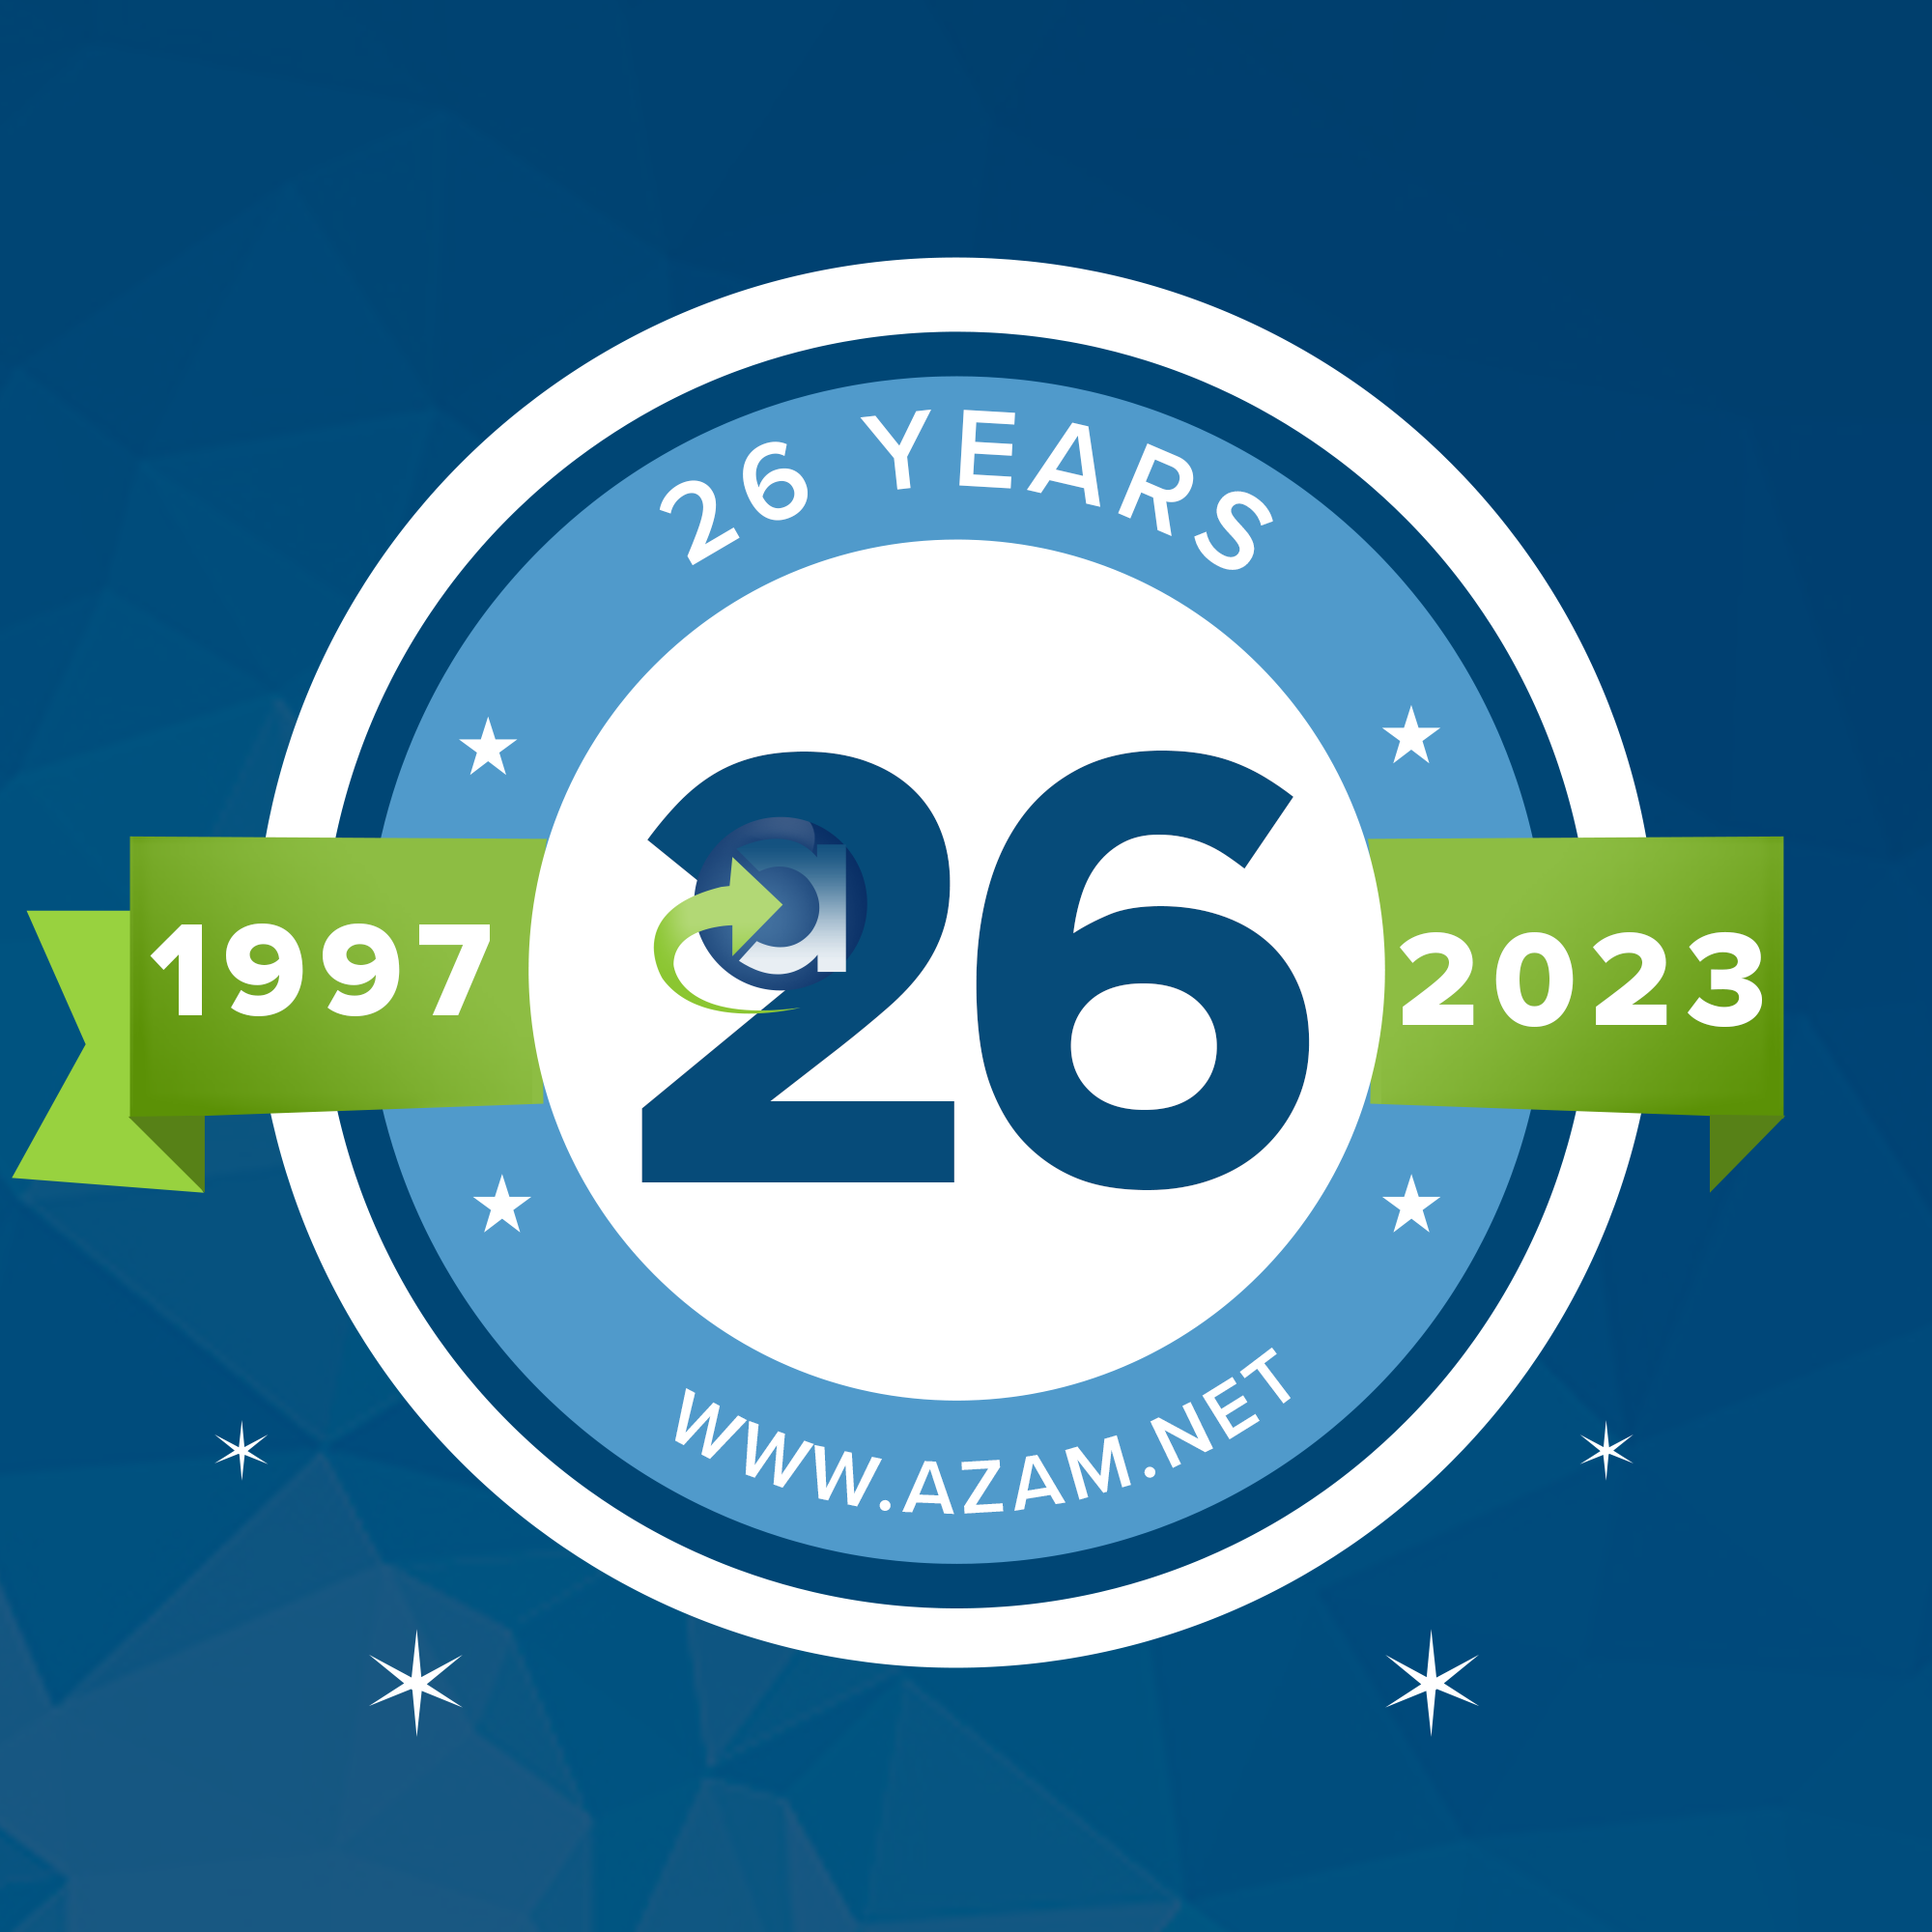 We are celebrating our 25th anniversary. By selecting Azam Marketing to do your work you are not risking your time and money on an inexperienced agency learning the ropes, but veterans in the business for a quarter of a century who know what works and what doesn't.